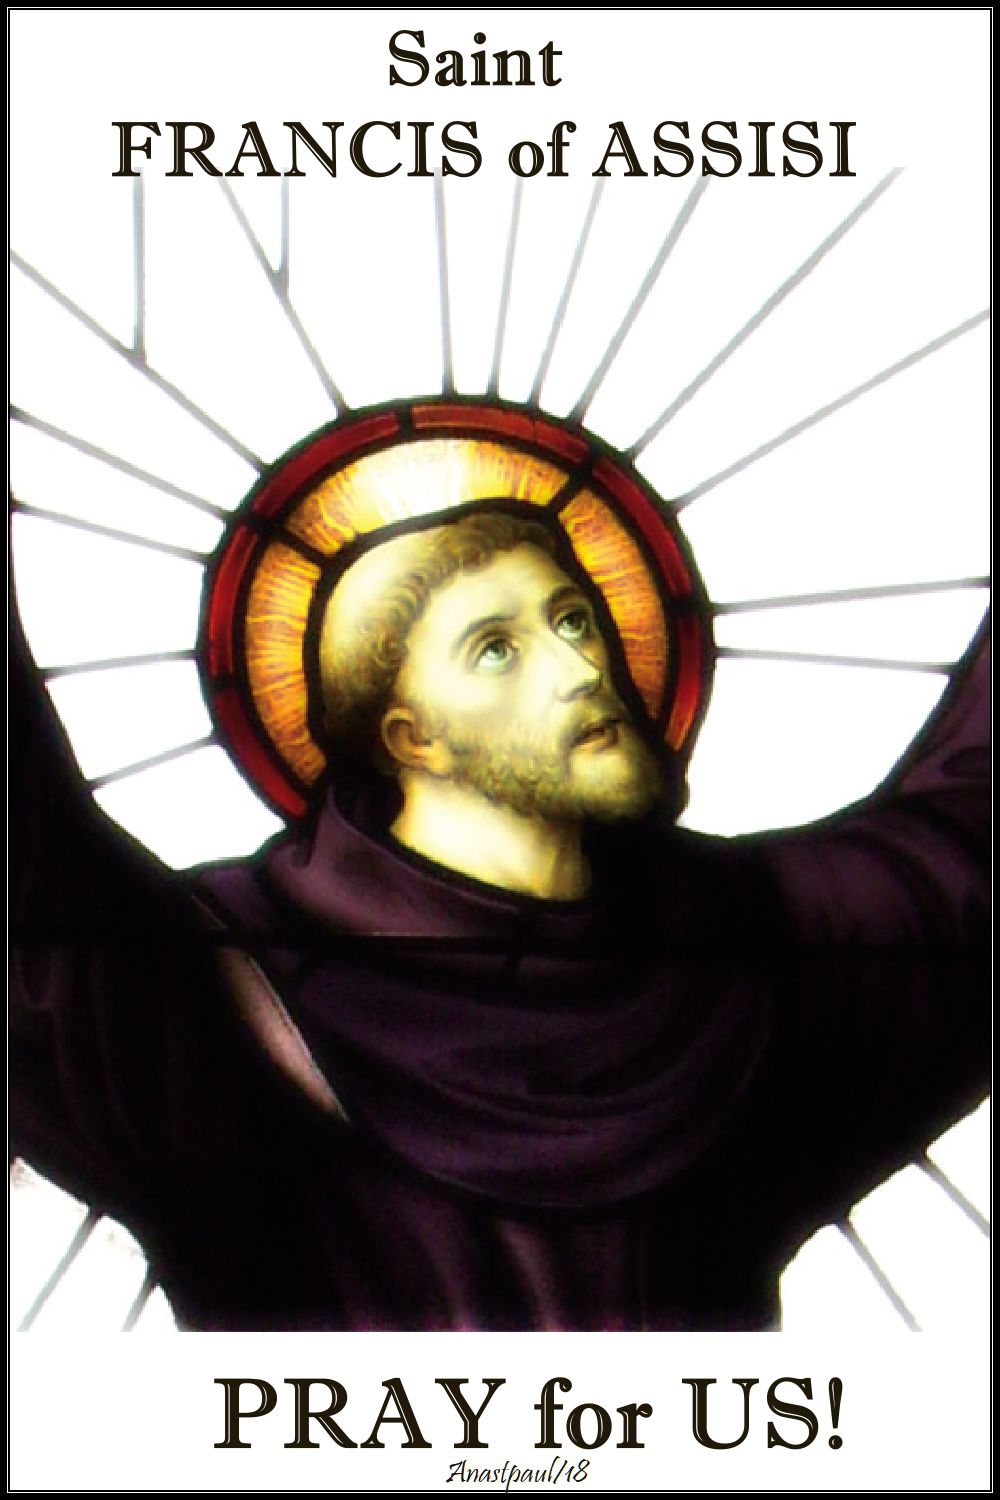 st francis of assisi pray for us - 4 oct 2018.jpg